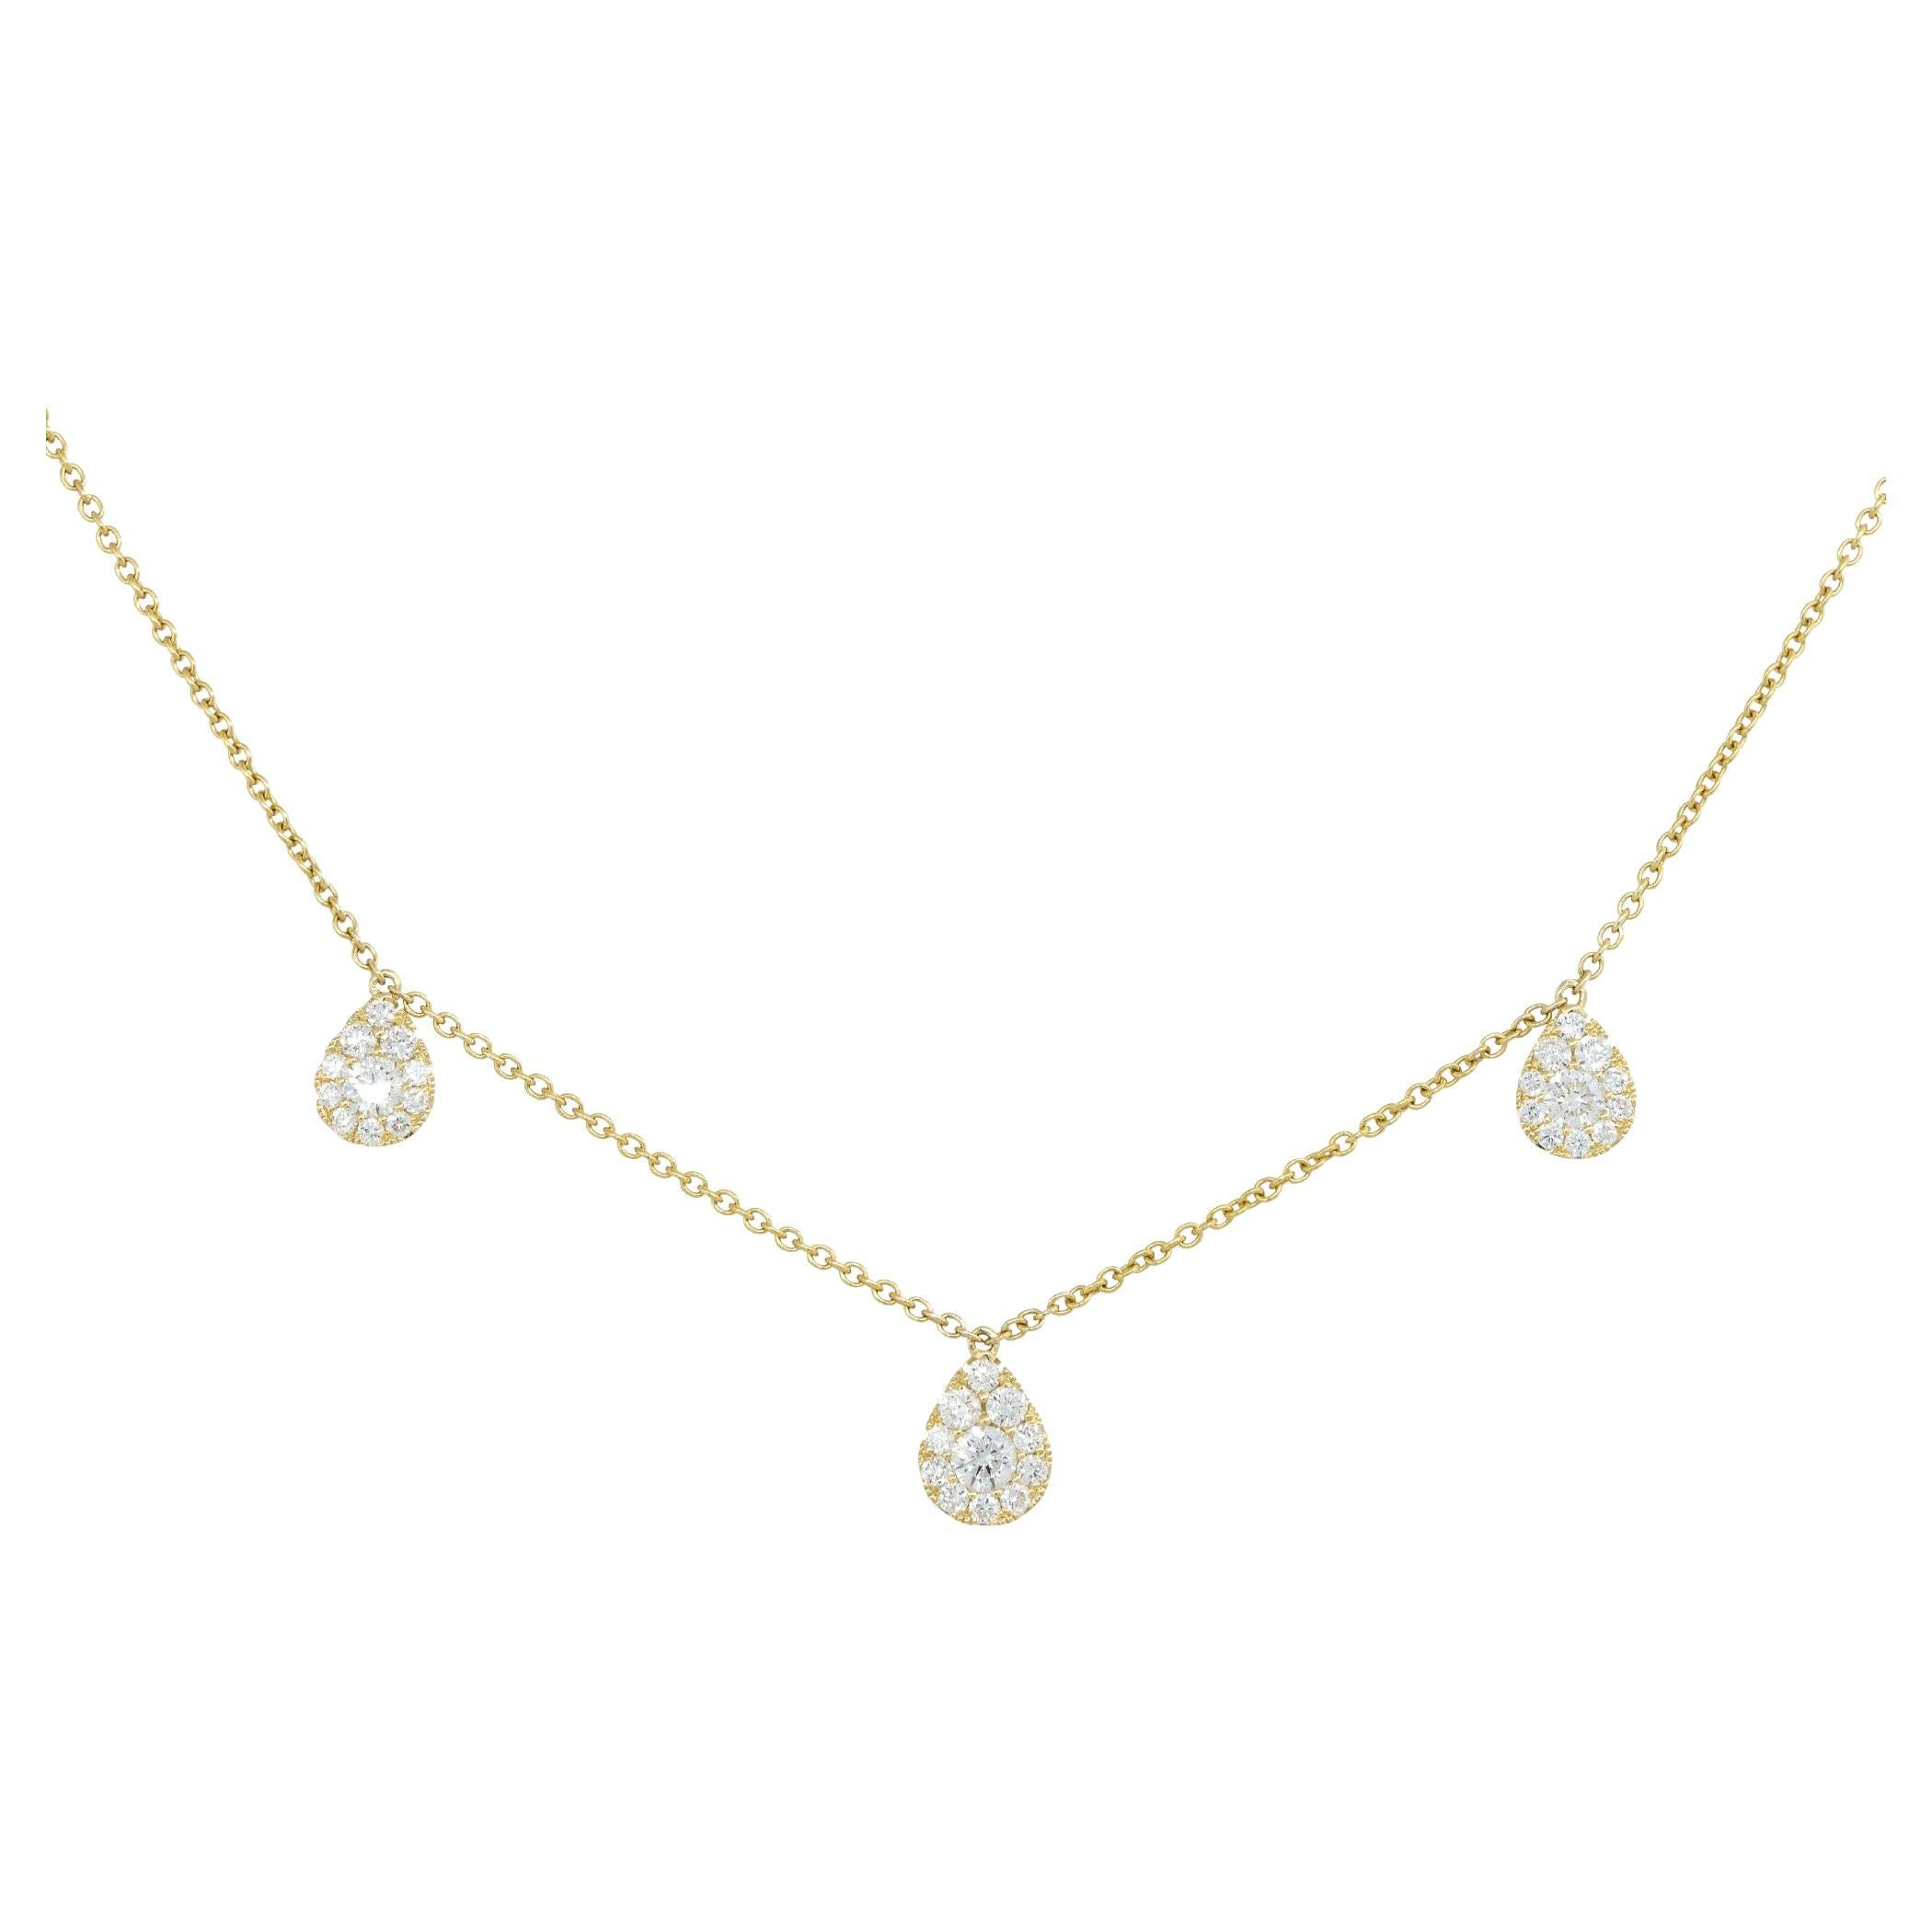 14k Yellow Gold 0.67ctw 3 Pave Diamond Pear Station Necklace

Material: 14k Yellow Gold
Diamond Details: Approximately 0.67ctw of Round Brilliant Diamonds. There are 3 Pave Diamond stations in the shape of pears along the front of the chain
Item